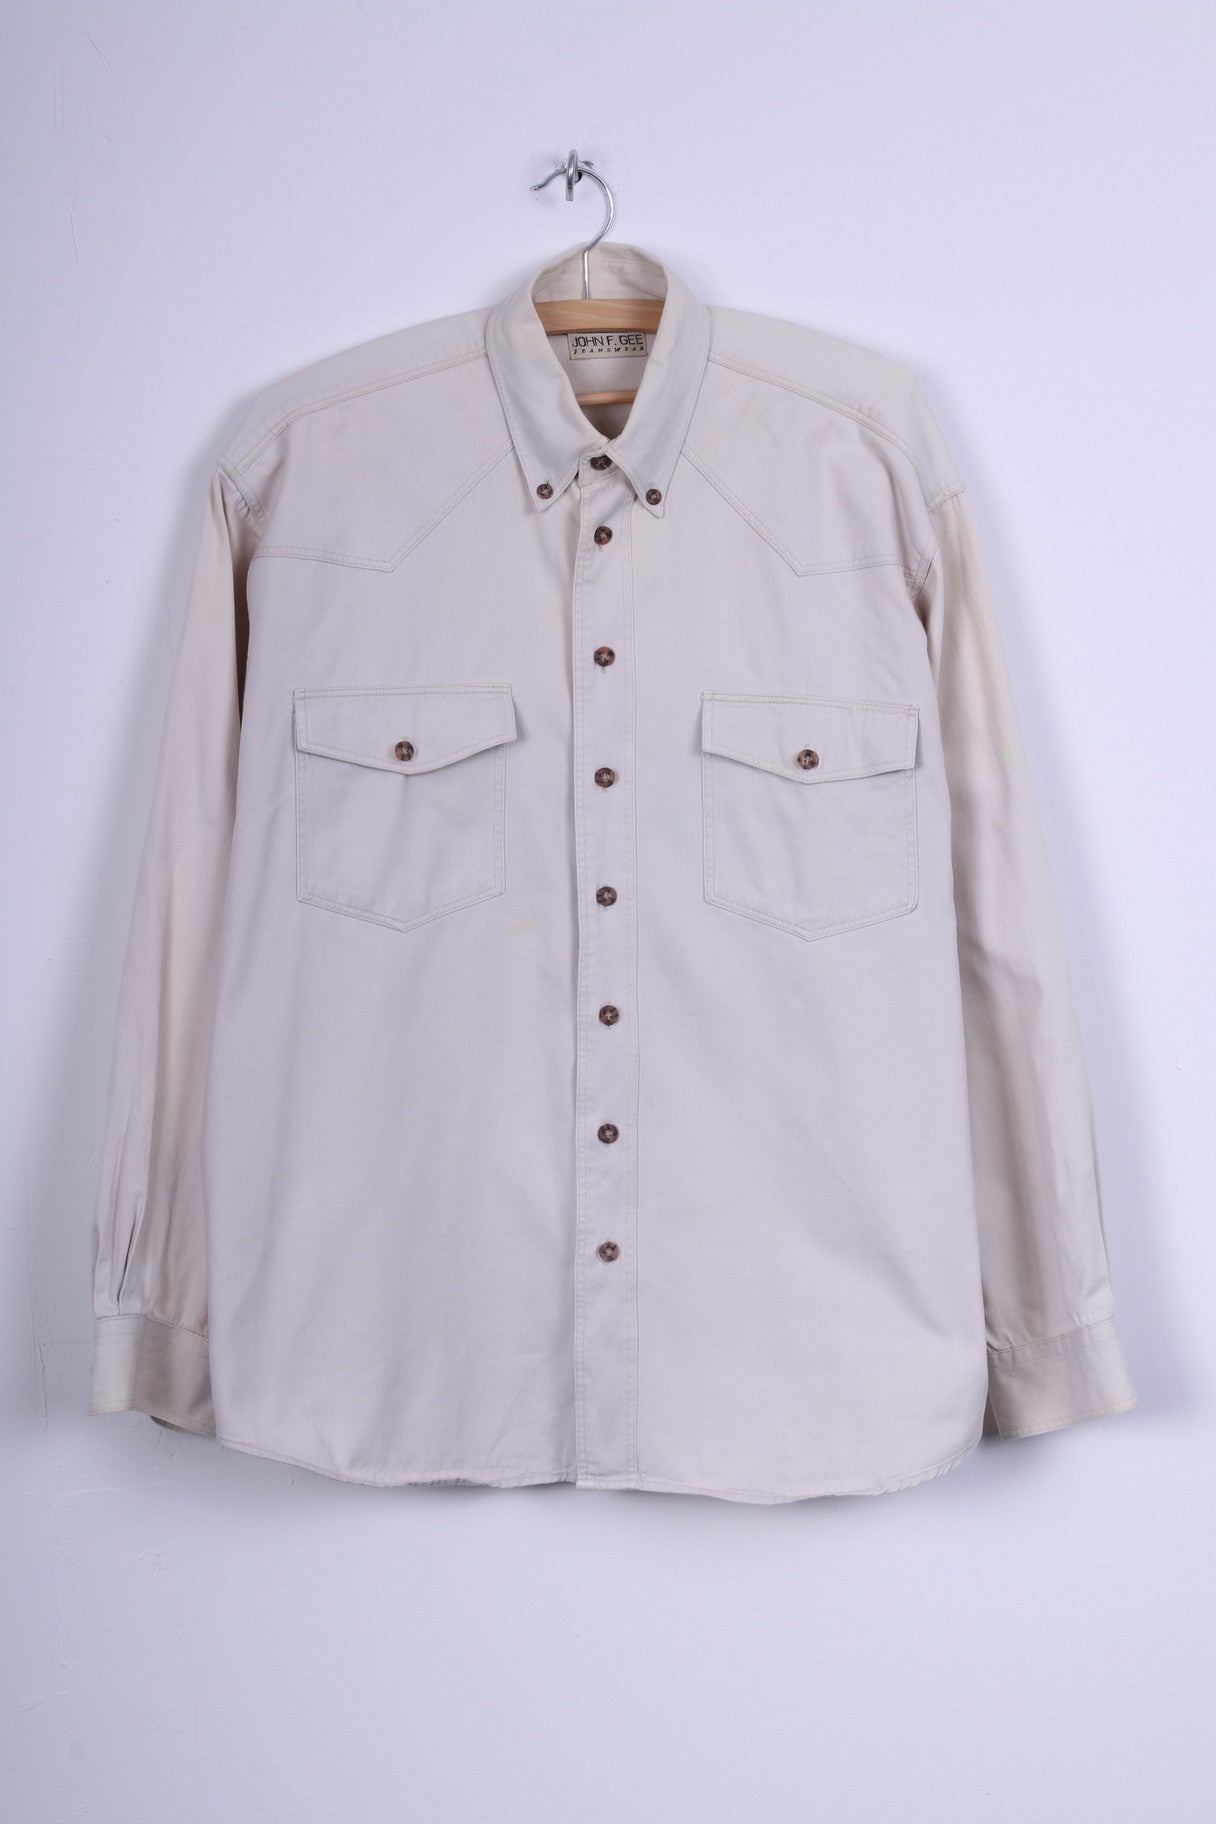 John F.Gee Jeanswear Mens 41/42 XL Casual Shirt Jeans Beige Detailed Buttons